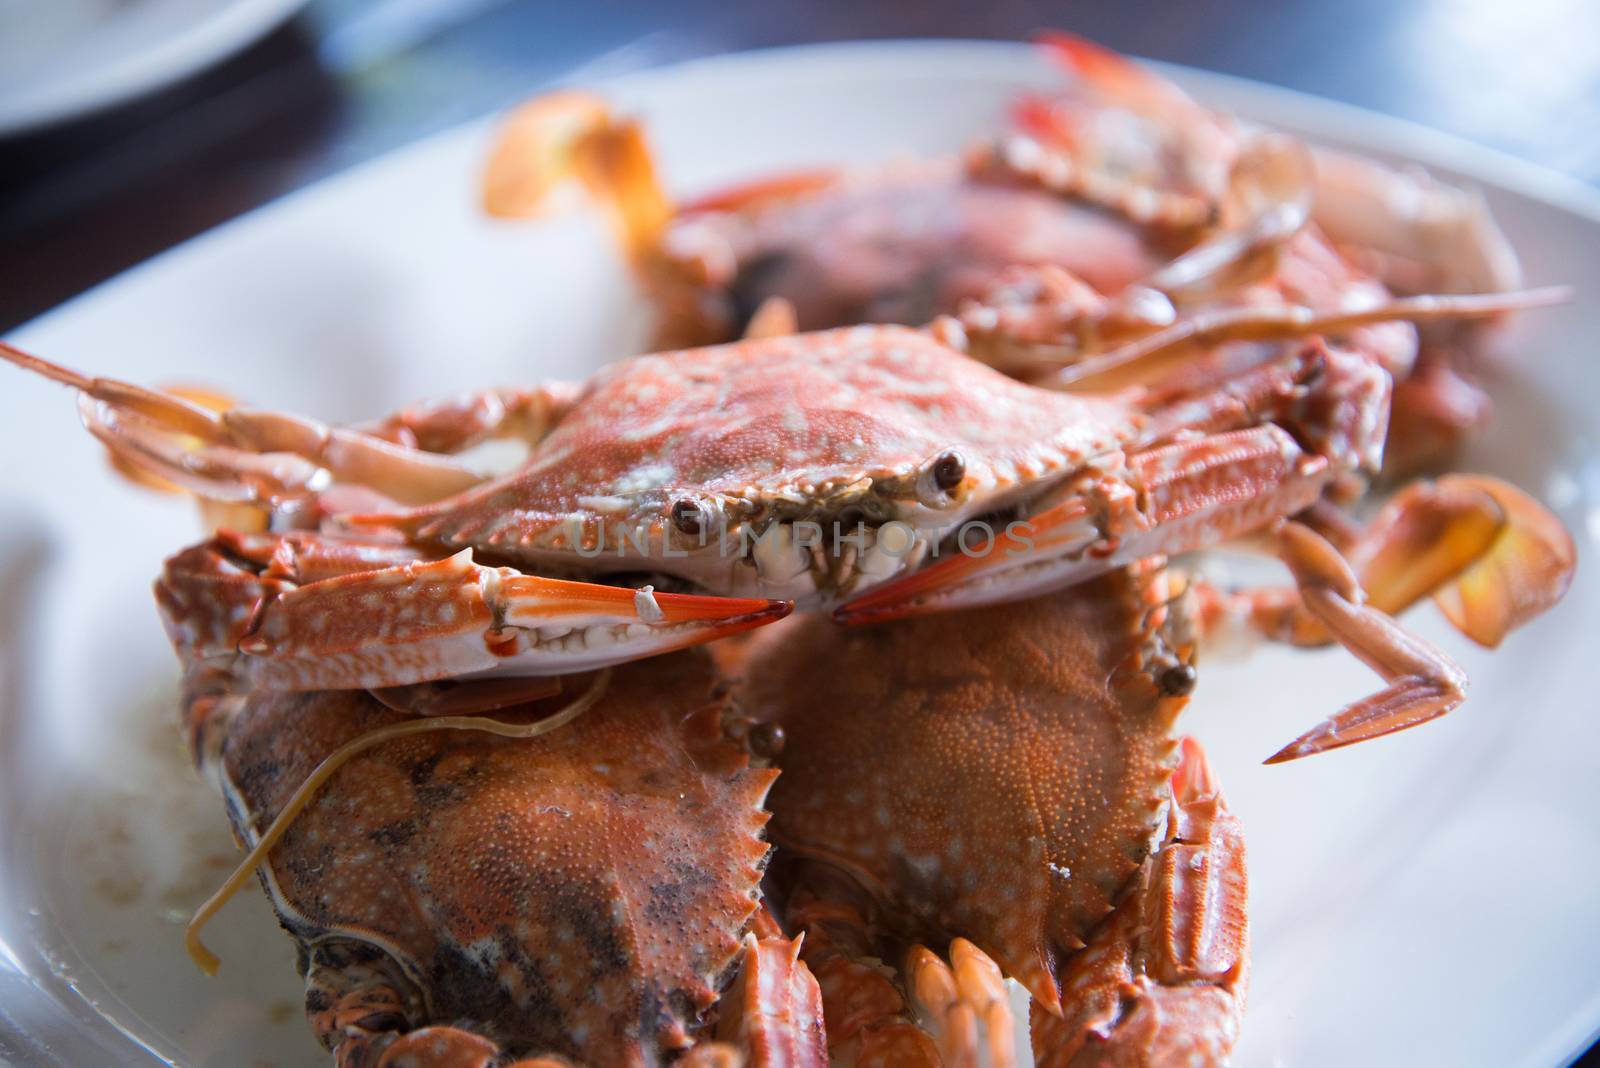 Close-up steamed blue crabs